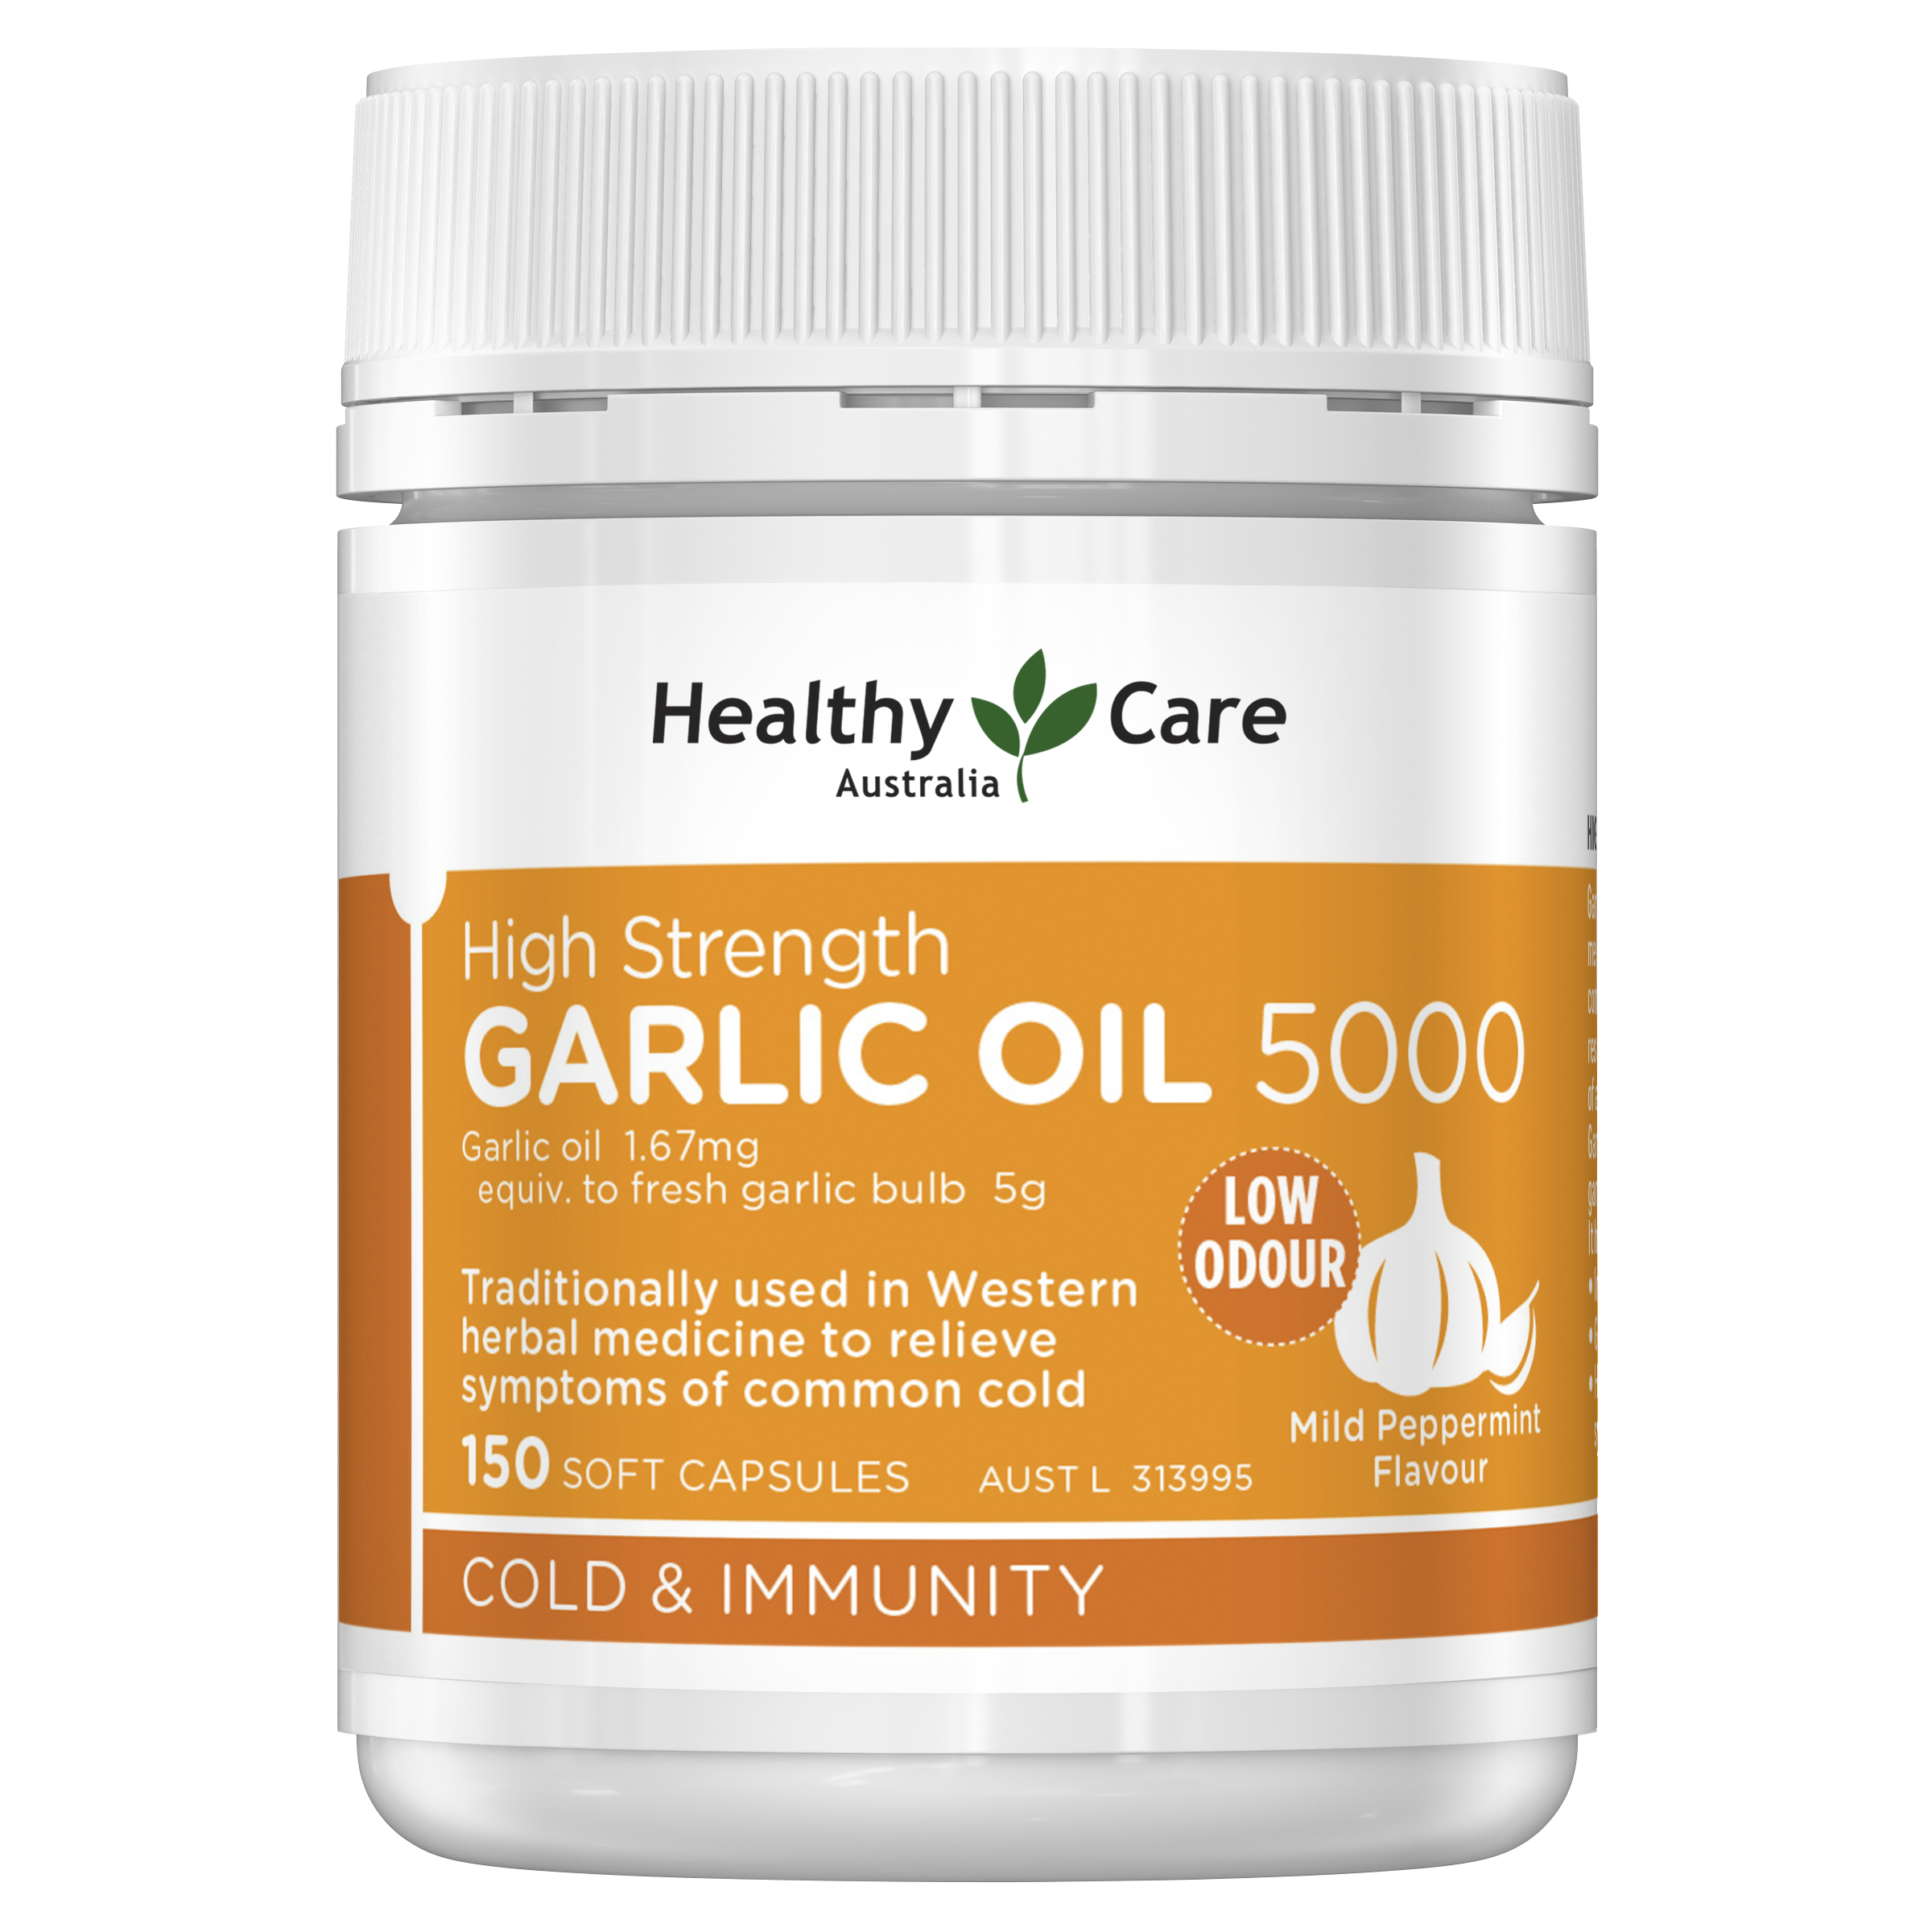 Healthy Care High Strength Garlic Oil 5000 150 Capsules